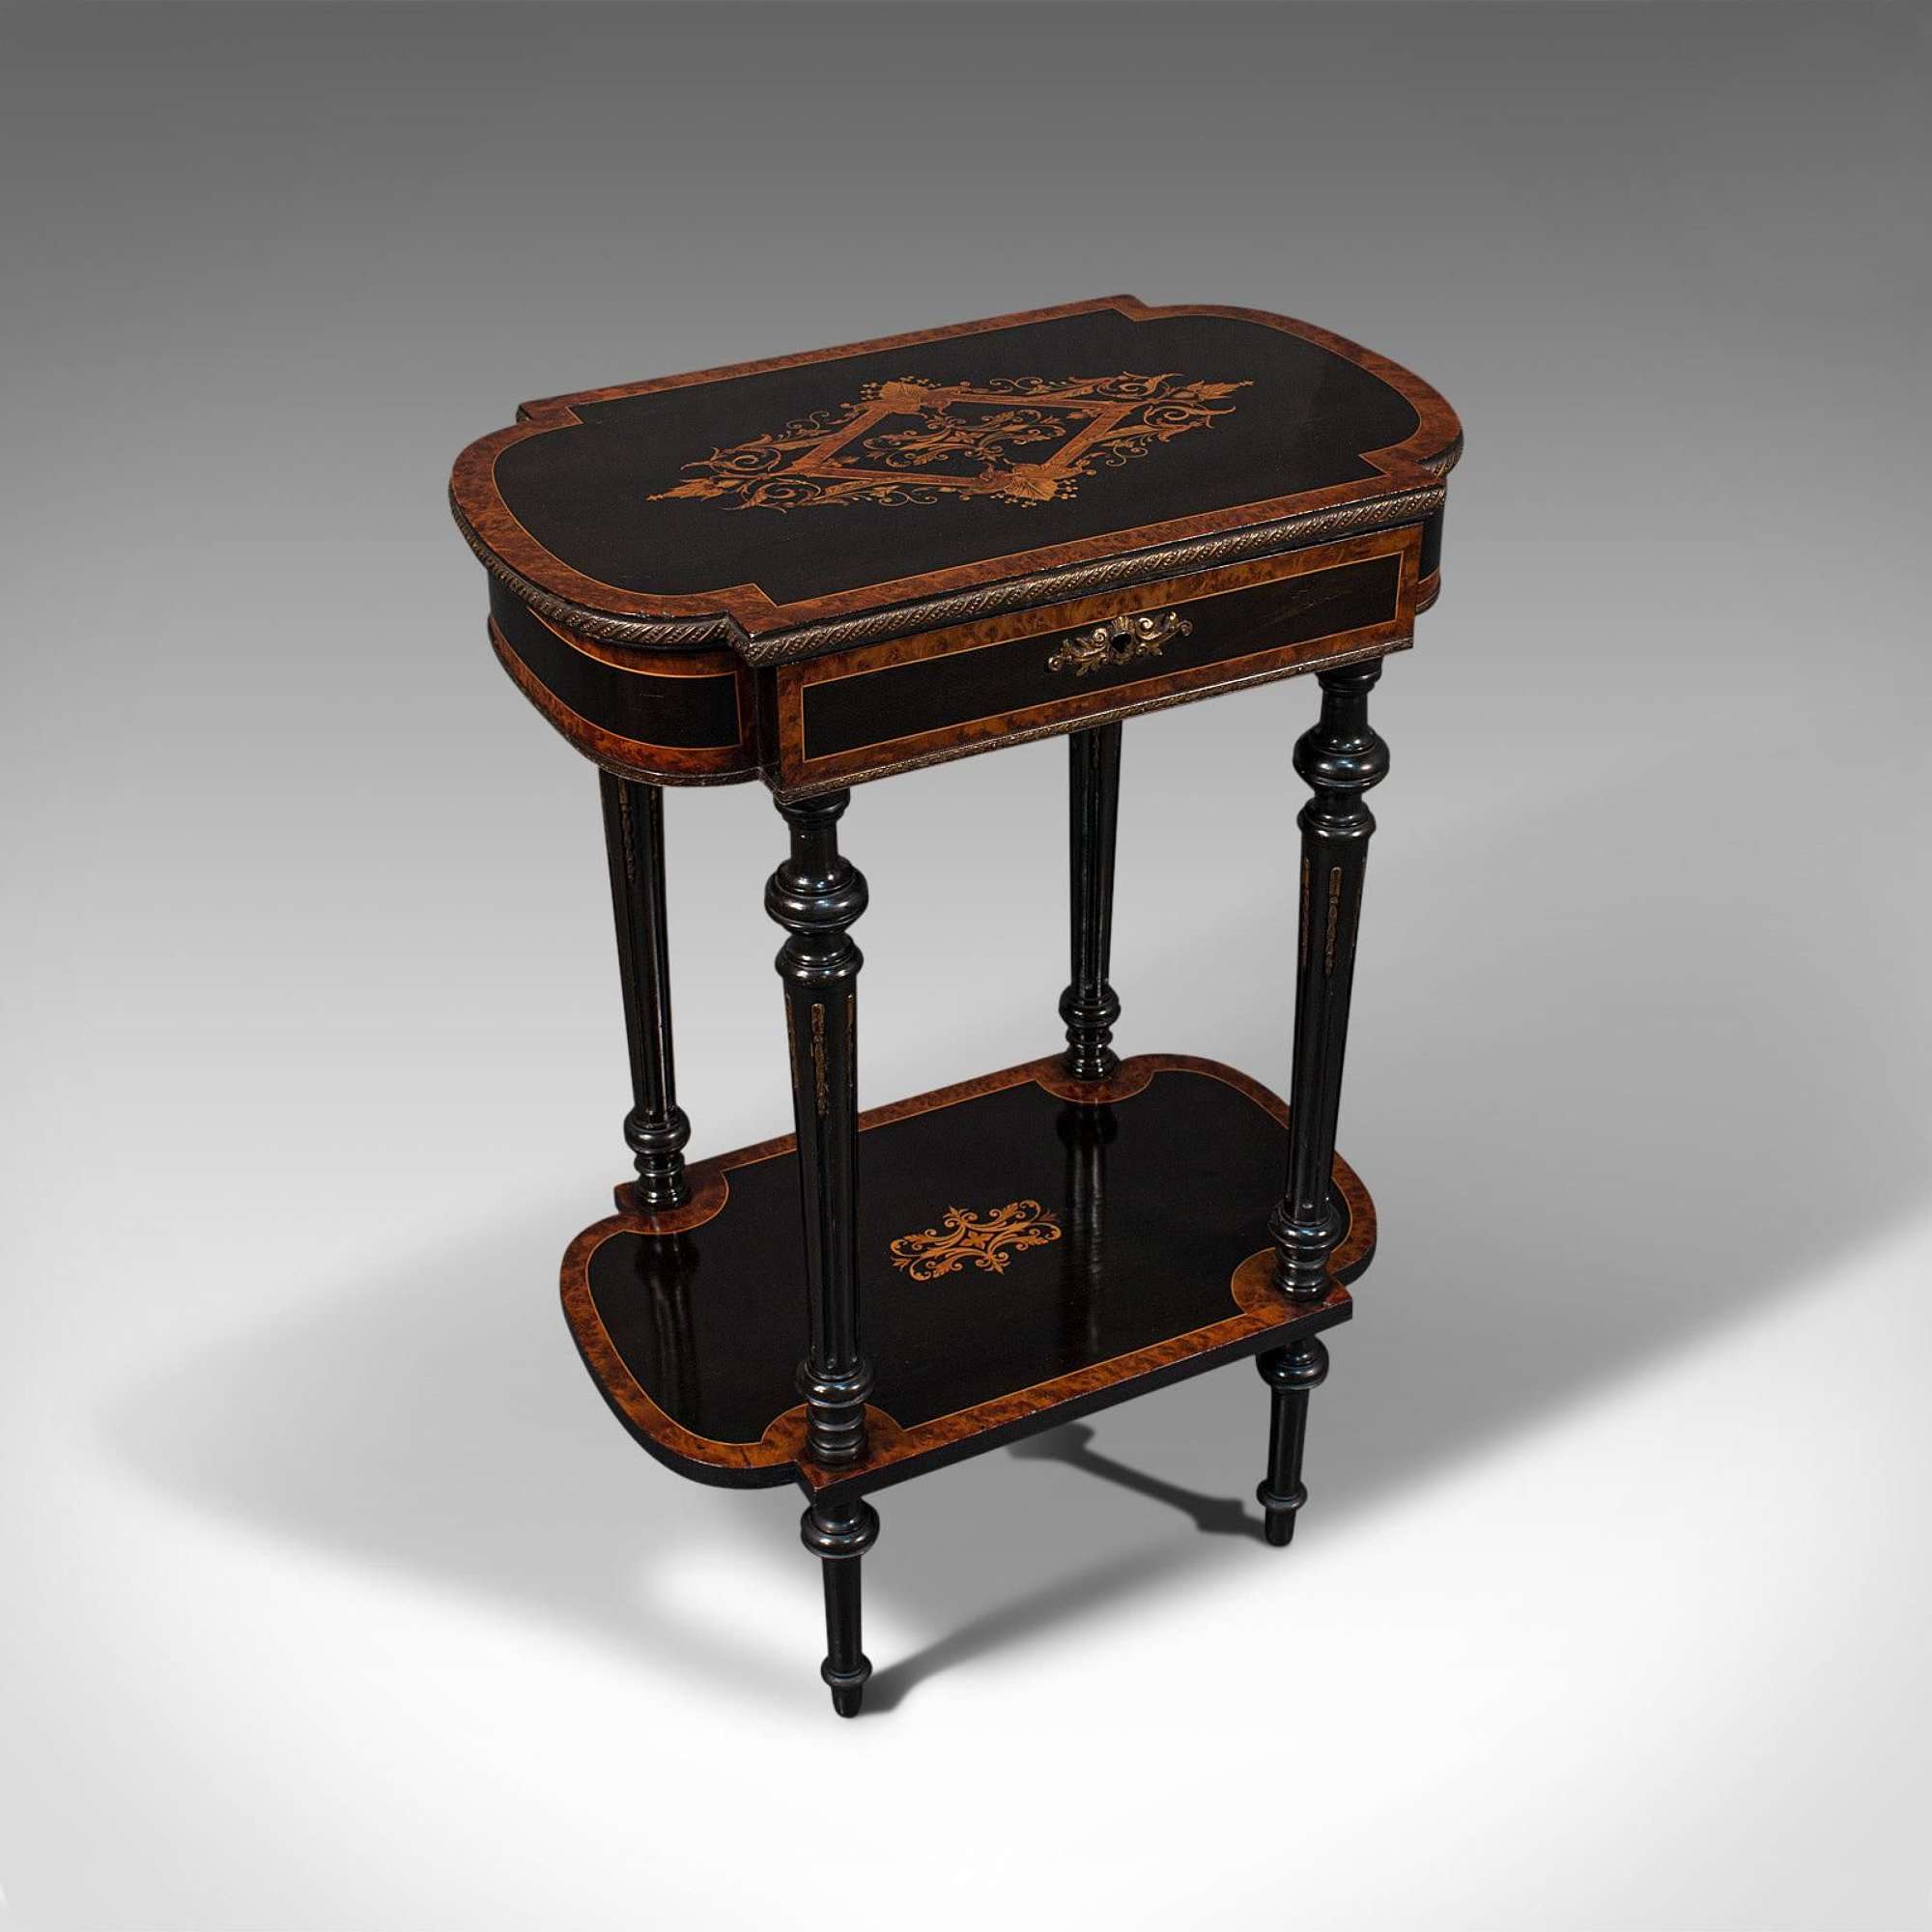 Antique Napoleon Iii Side Table, French, Etagere, Burr Walnut, Sewing C.1870